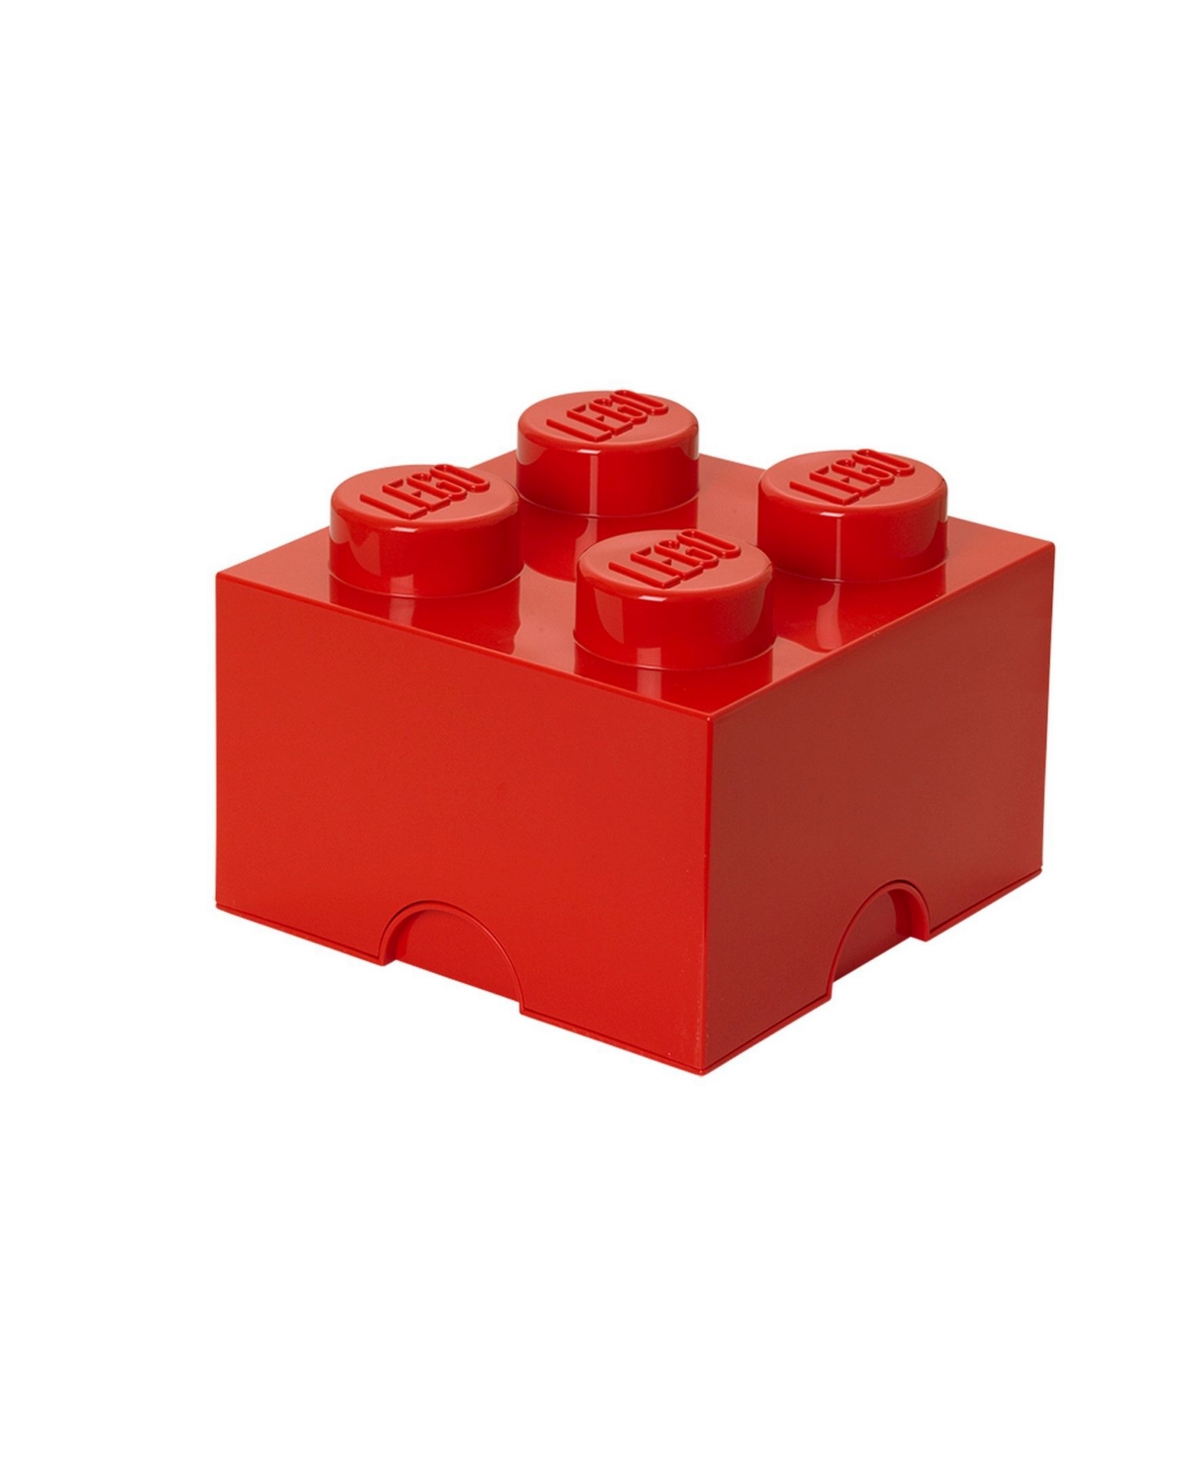 Lego Storage Brick With 4 Knobs In Red